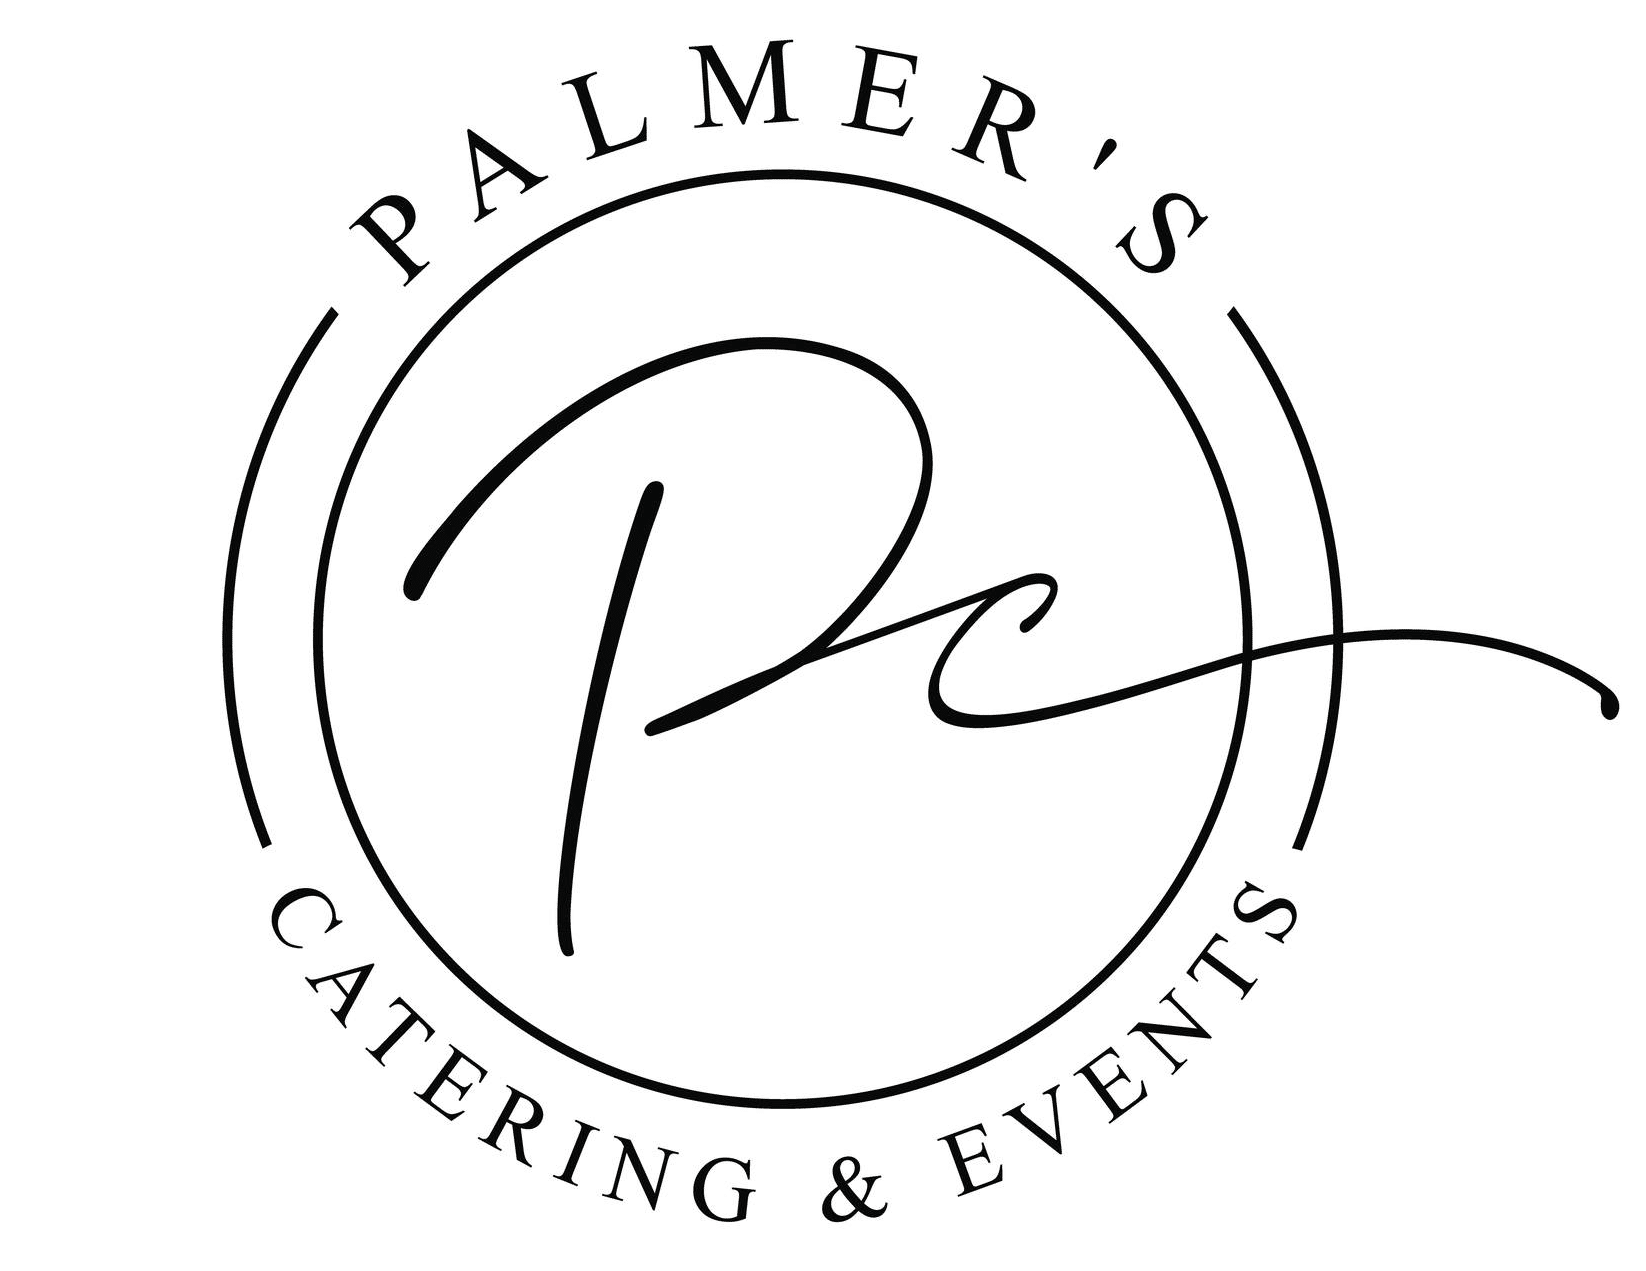 Palmers Catering & Events